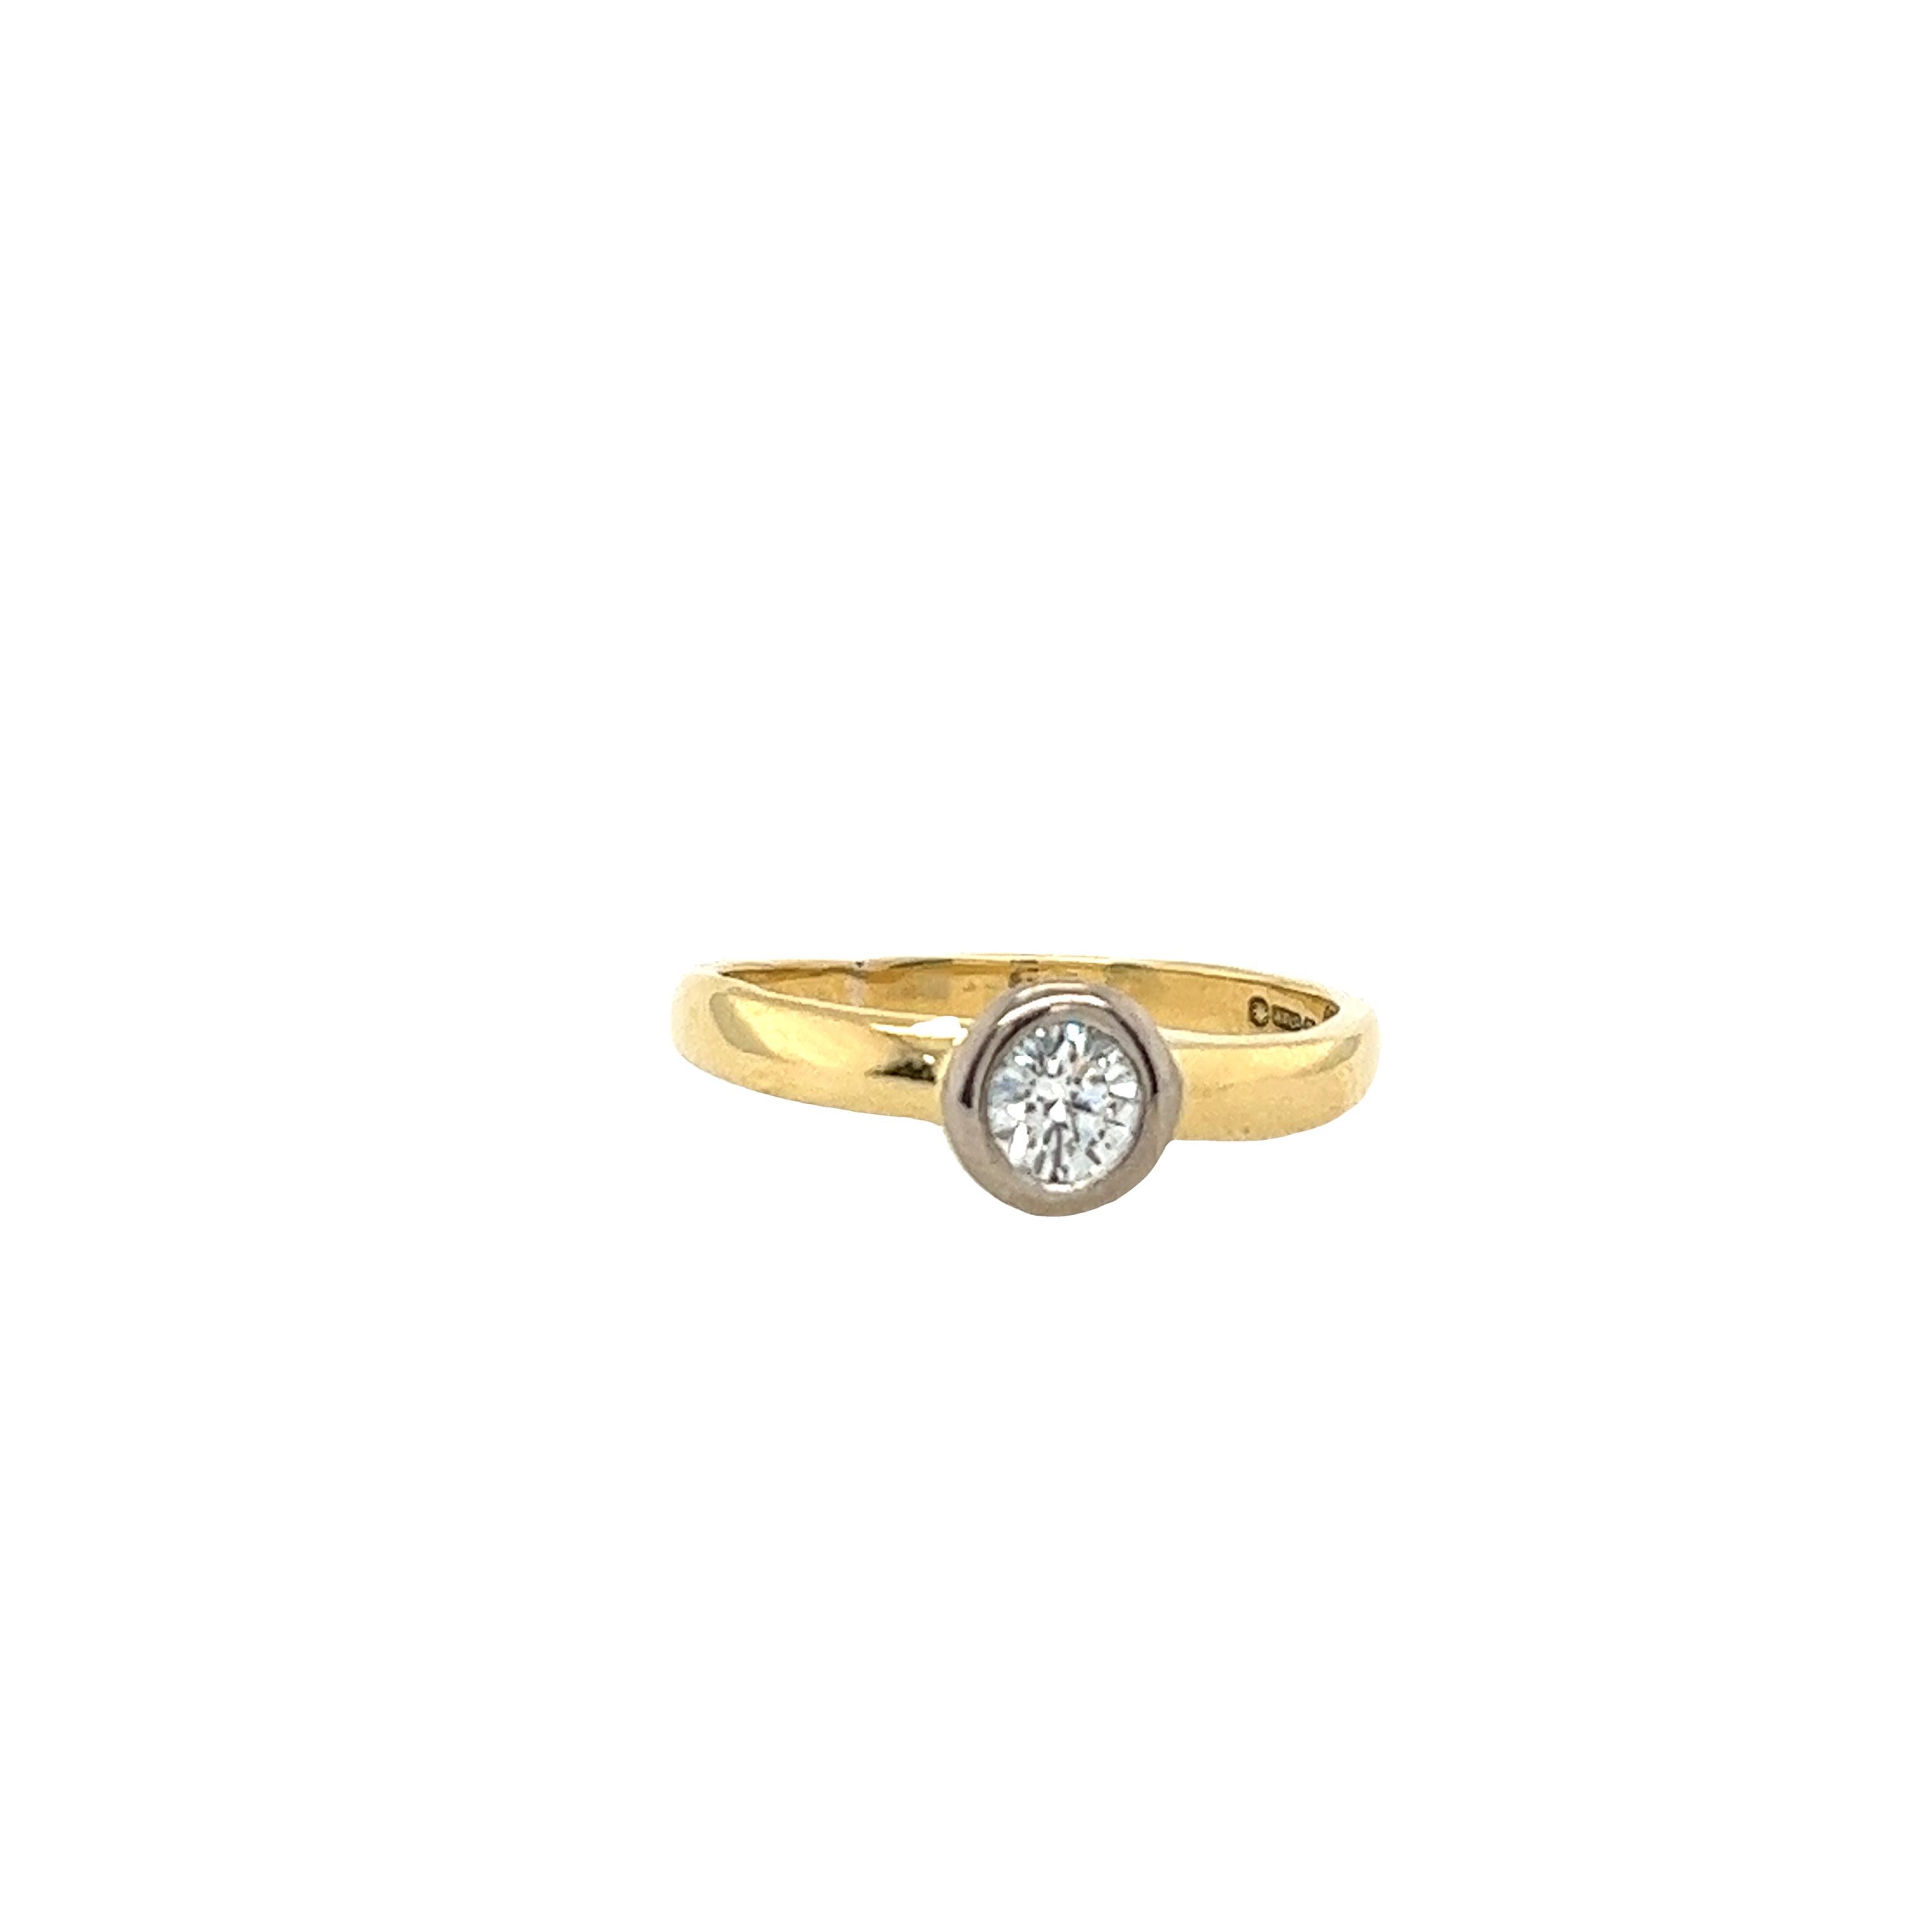 Women's 18ct Yellow Gold & White Solitaire Diamond Ring Set With 1 Round Diamond For Sale